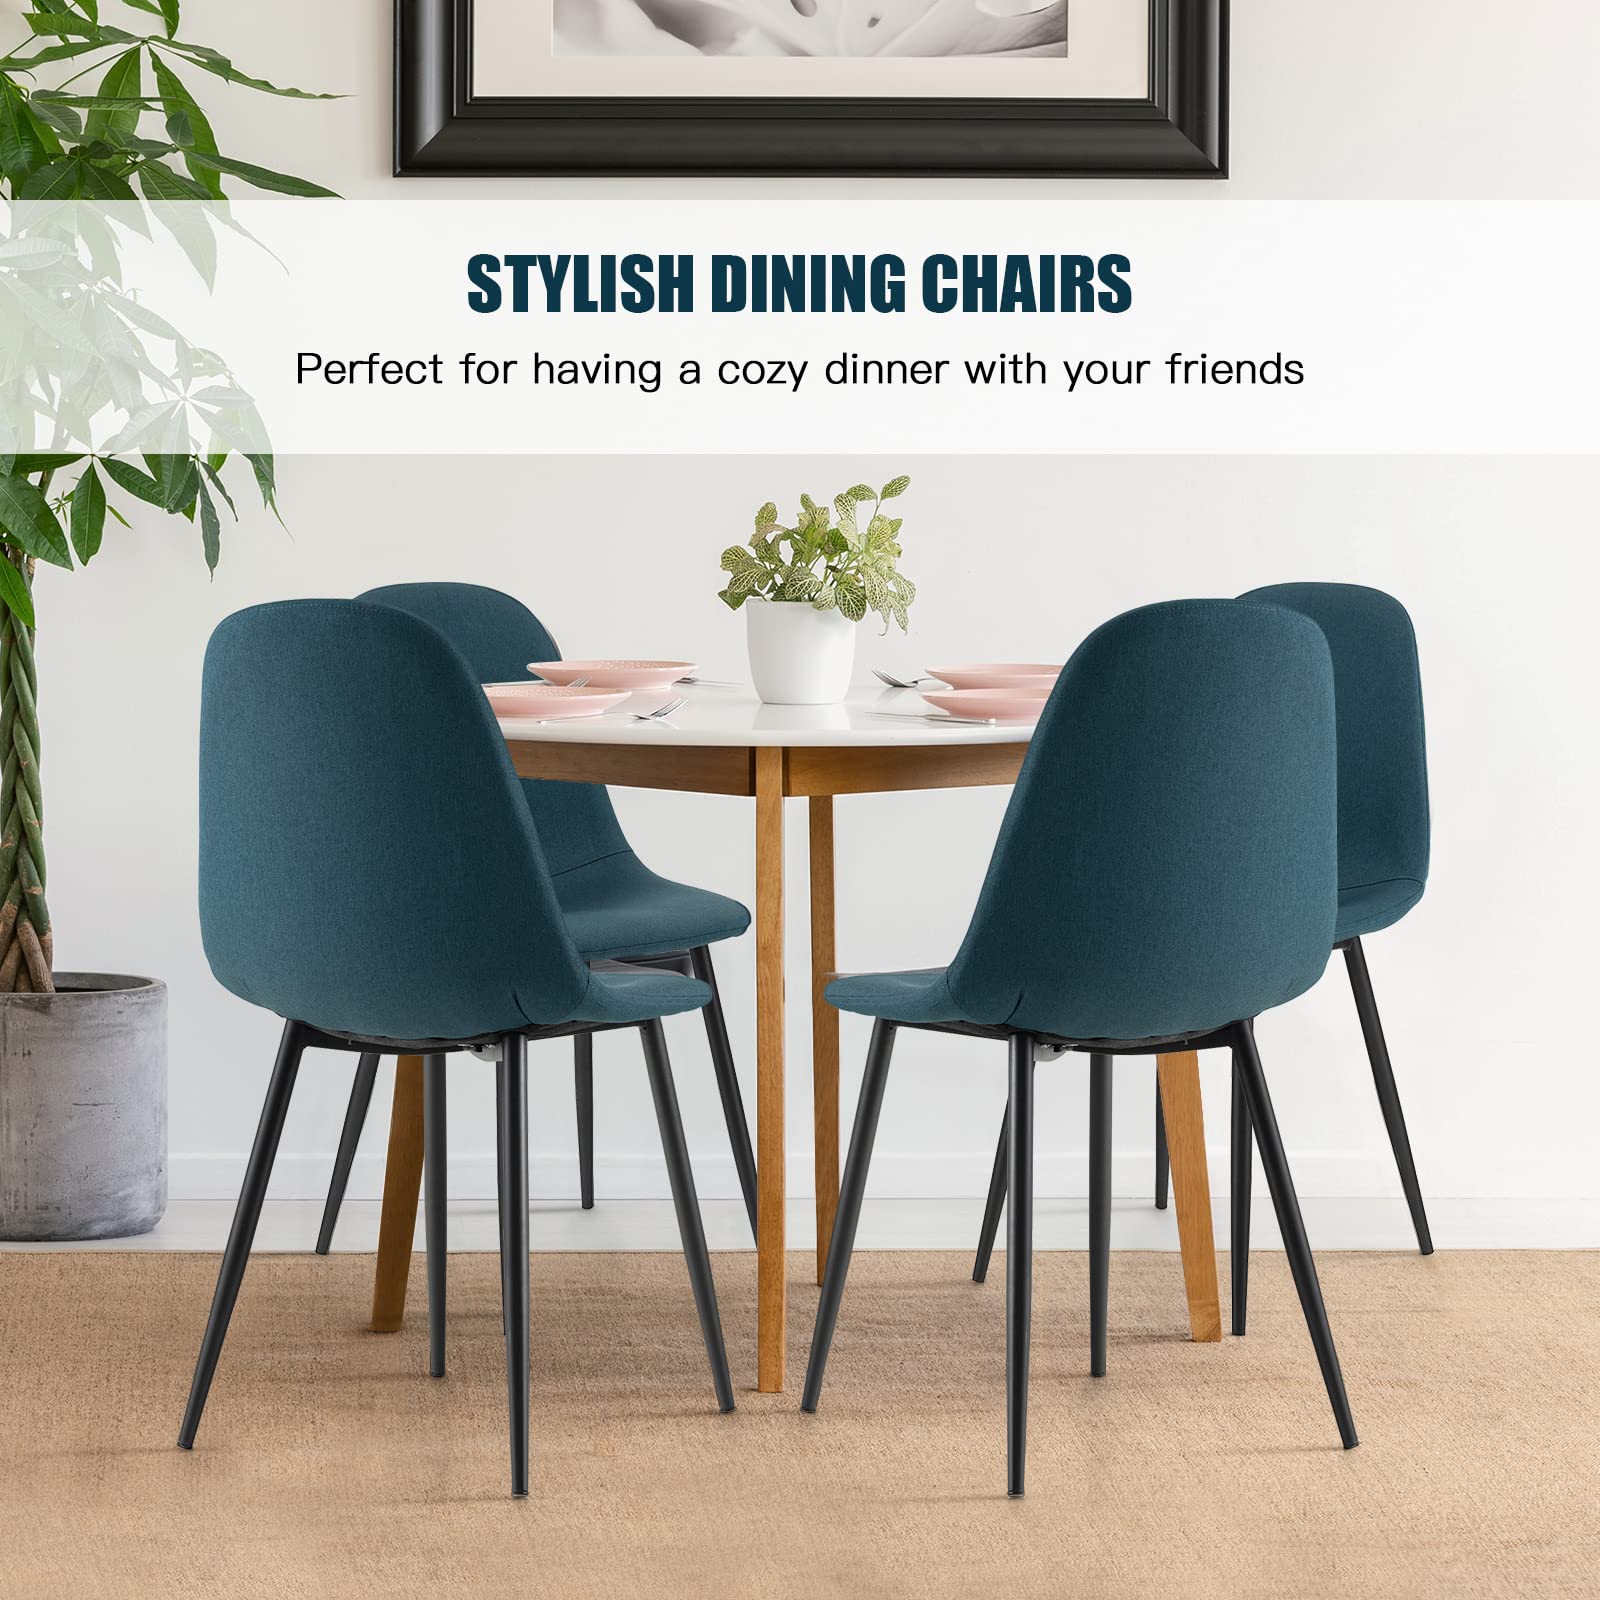 Giantex Modern Dining Chairs Set of 4 - Classic Comfy Upholstered 17” High Backrest Linen Dining Room Chairs